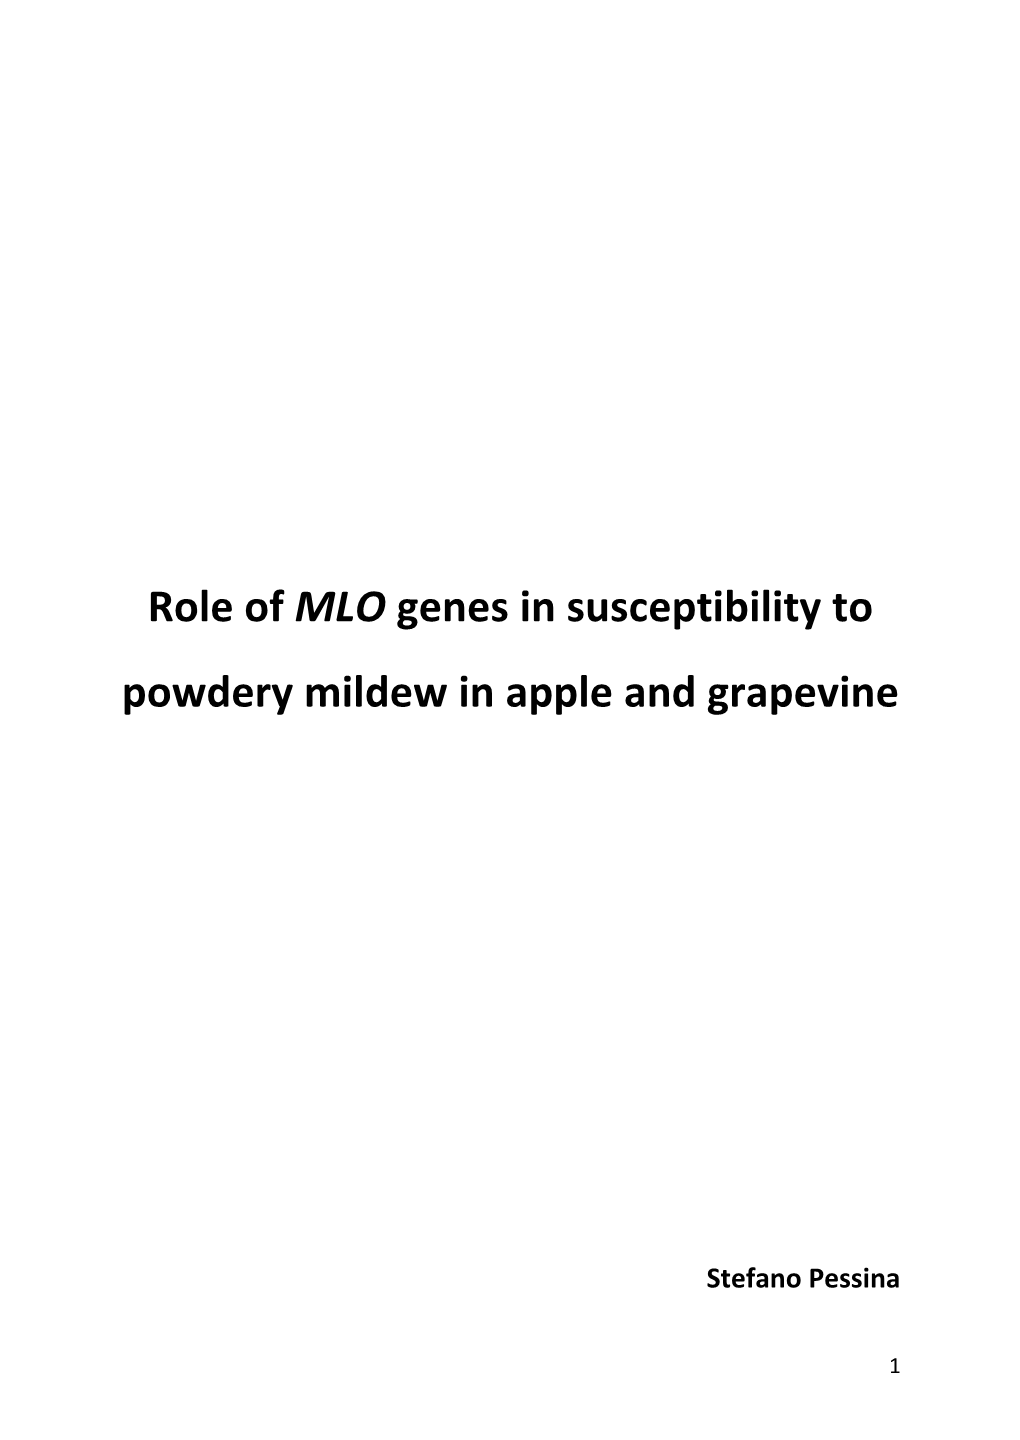 Role of MLO Genes in Susceptibility to Powdery Mildew in Apple and Grapevine